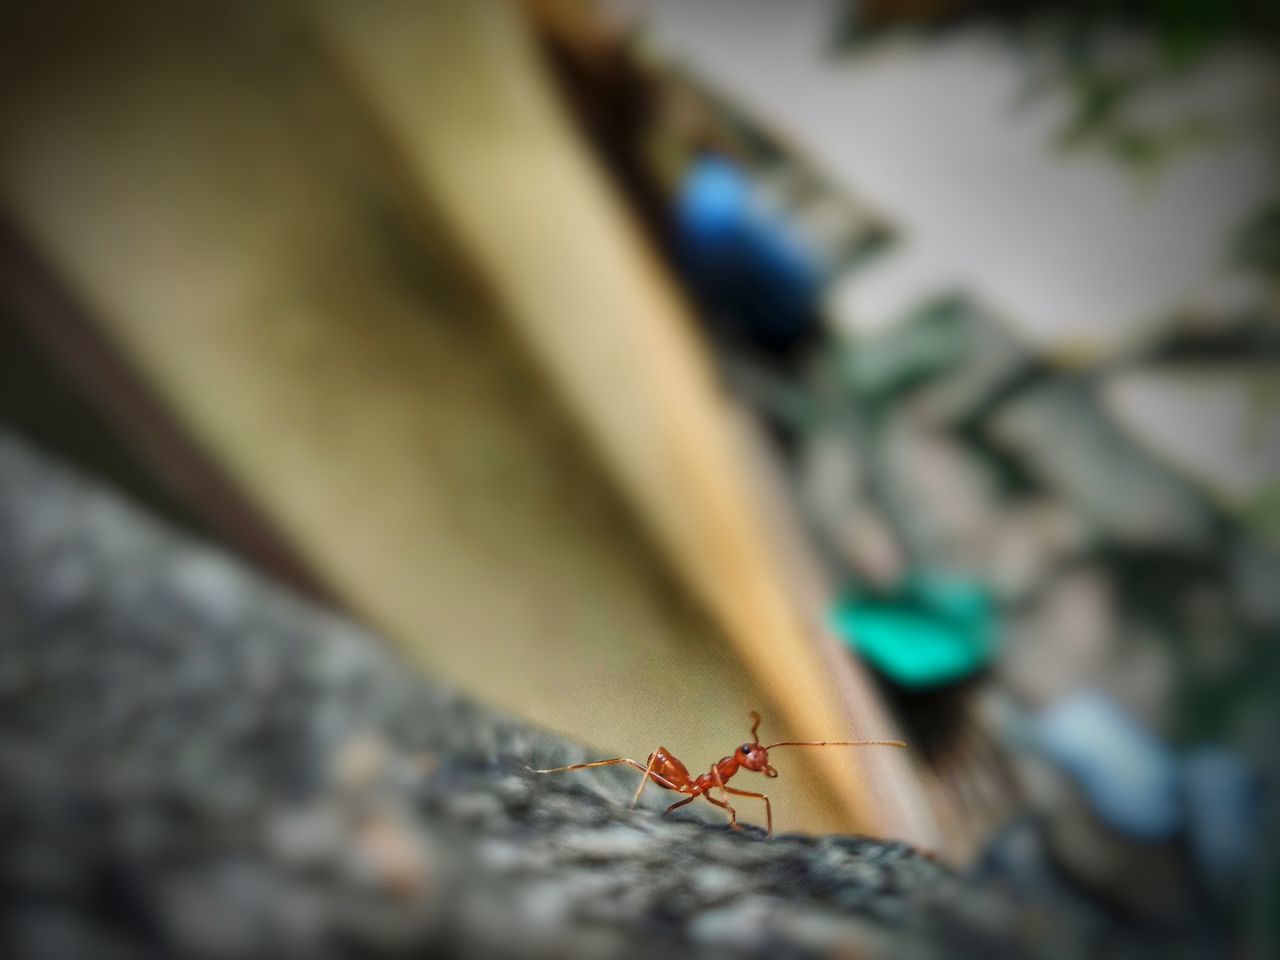 selective focus, invertebrate, close-up, animal themes, animal, animals in the wild, animal wildlife, day, insect, one animal, no people, rock, nature, solid, rock - object, outdoors, green color, textured, ant, high angle view